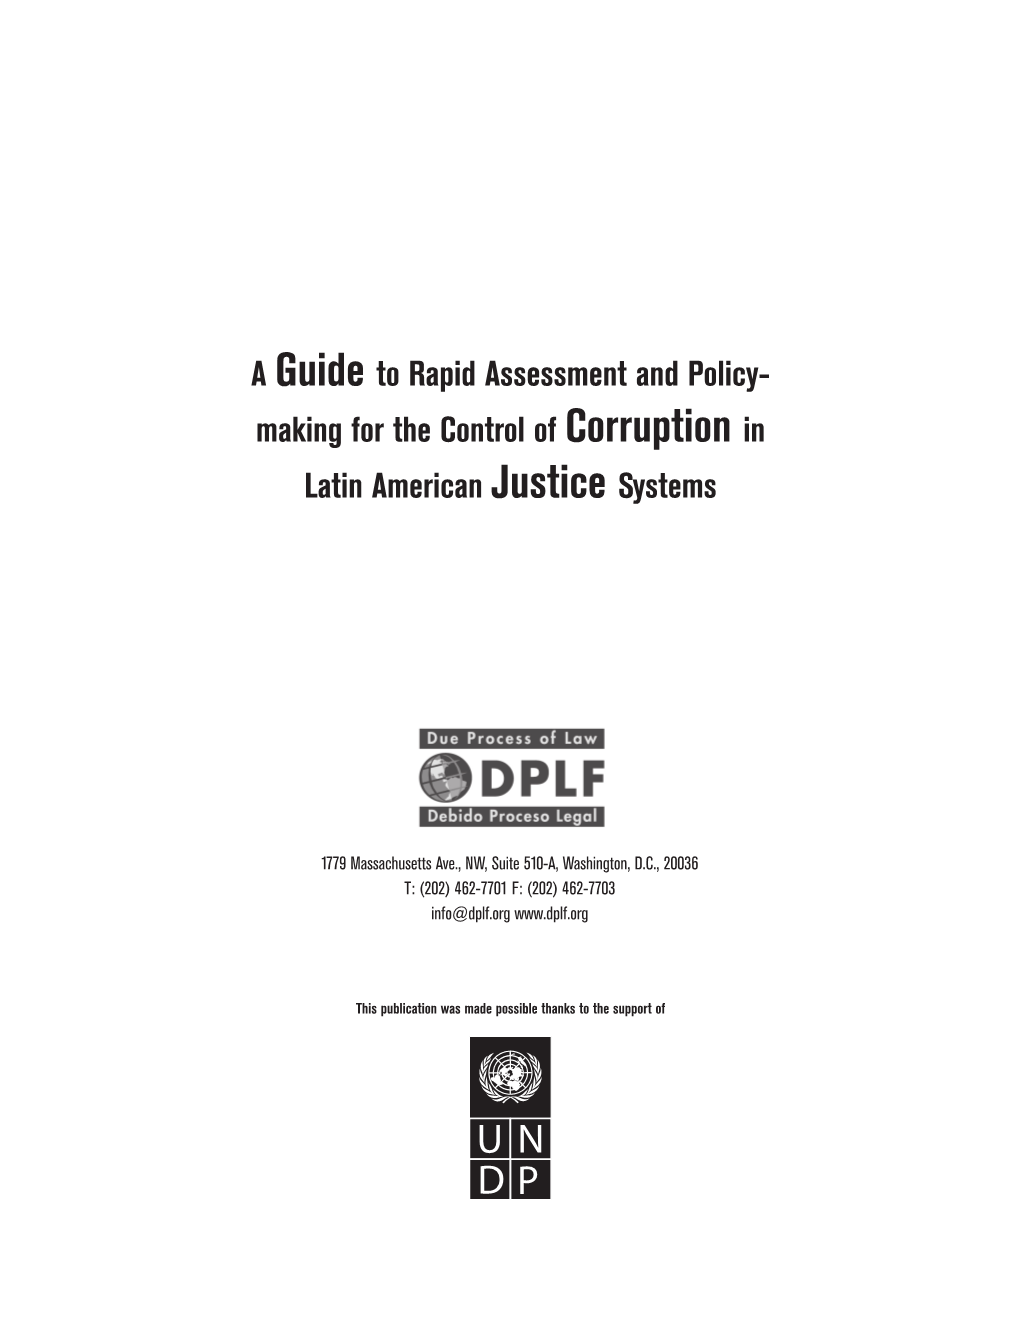 A Guide to Rapid Assessment and Policy- Making for the Control of Corruption in Latin American Justice Systems